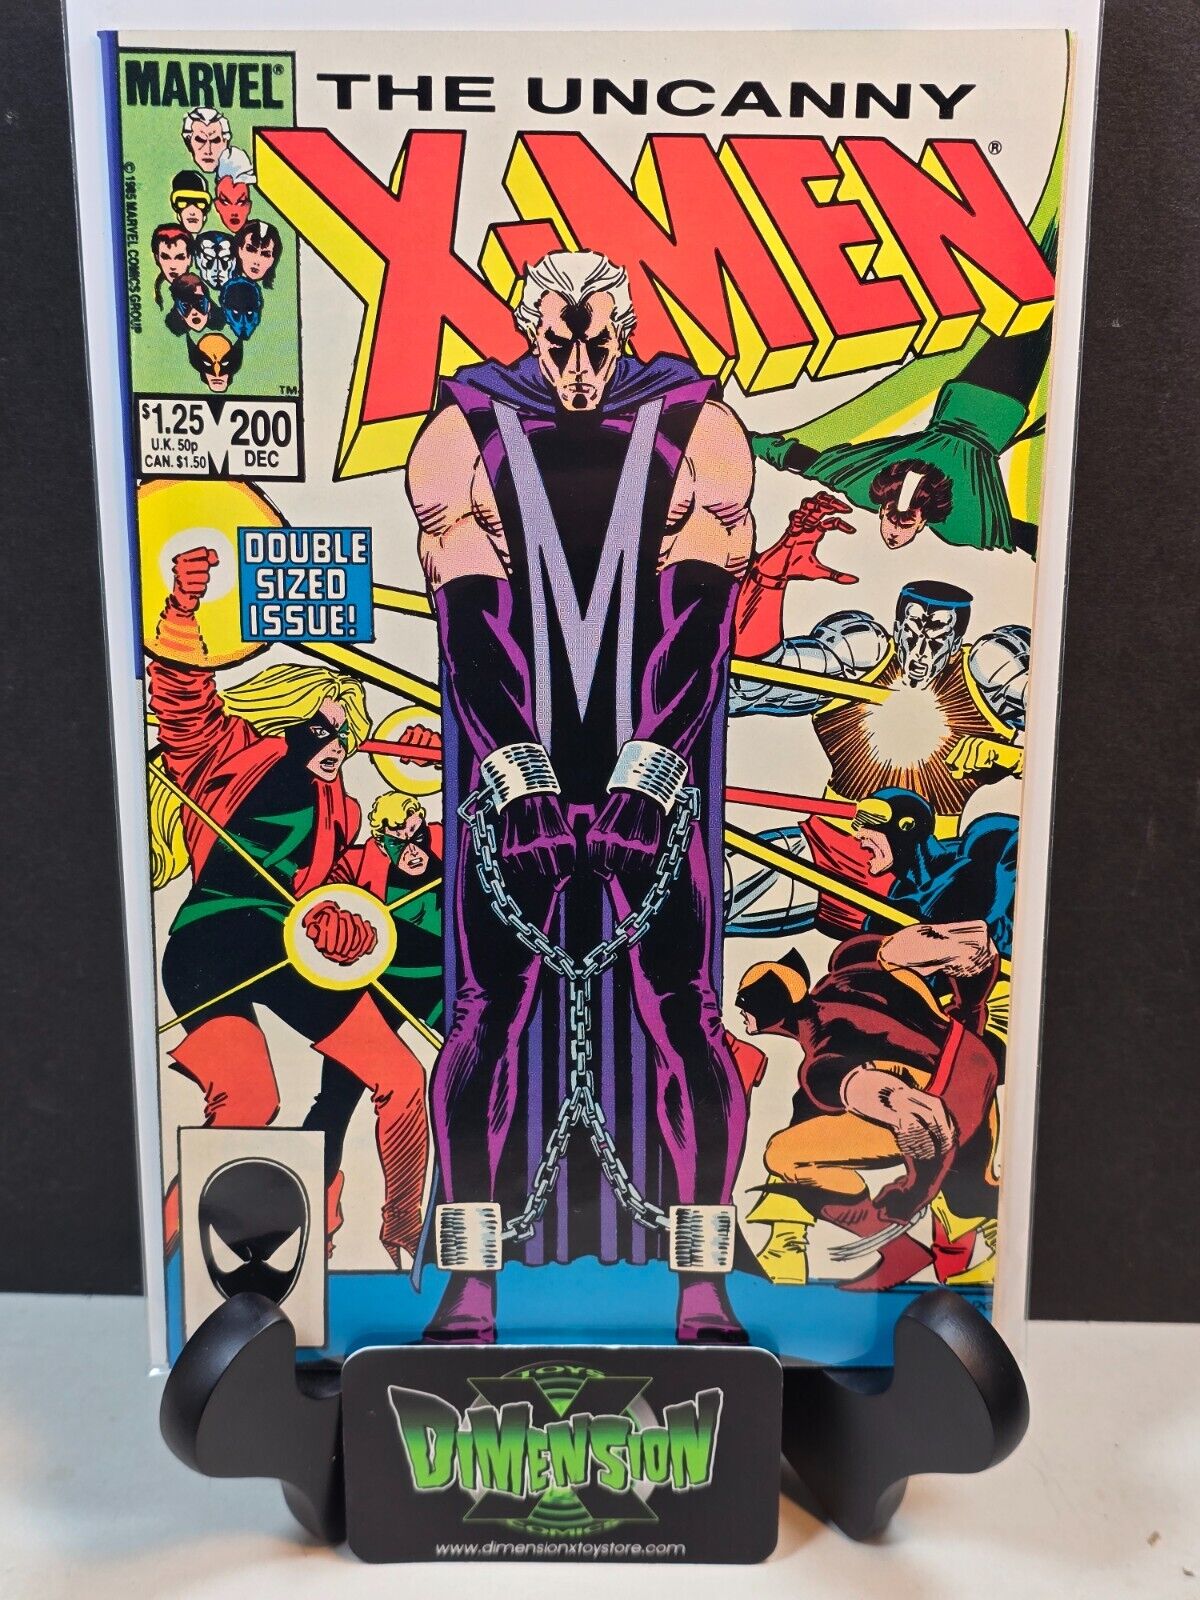 THE UNCANNY X-MEN #200 NM OR BETTER HIGH GRADE UNCIRCULATED TRIAL OF MAGNETO